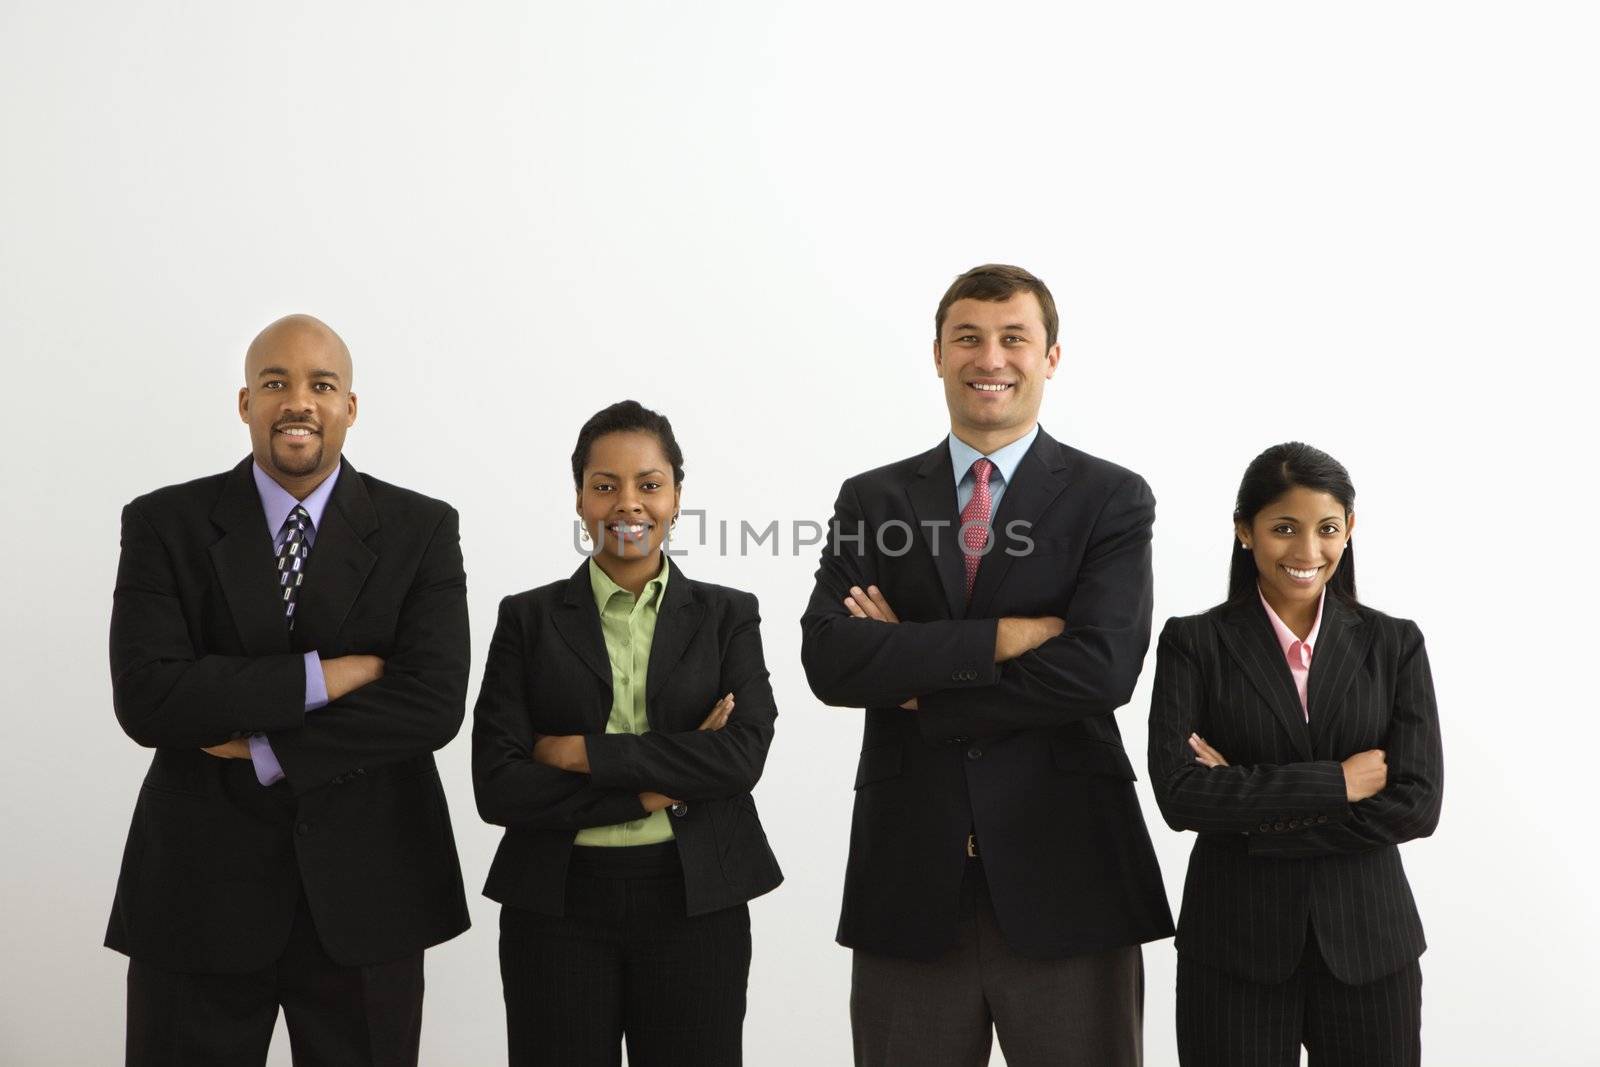 Portrait of businessmen and businesswomen standing smiling with arms crossed.